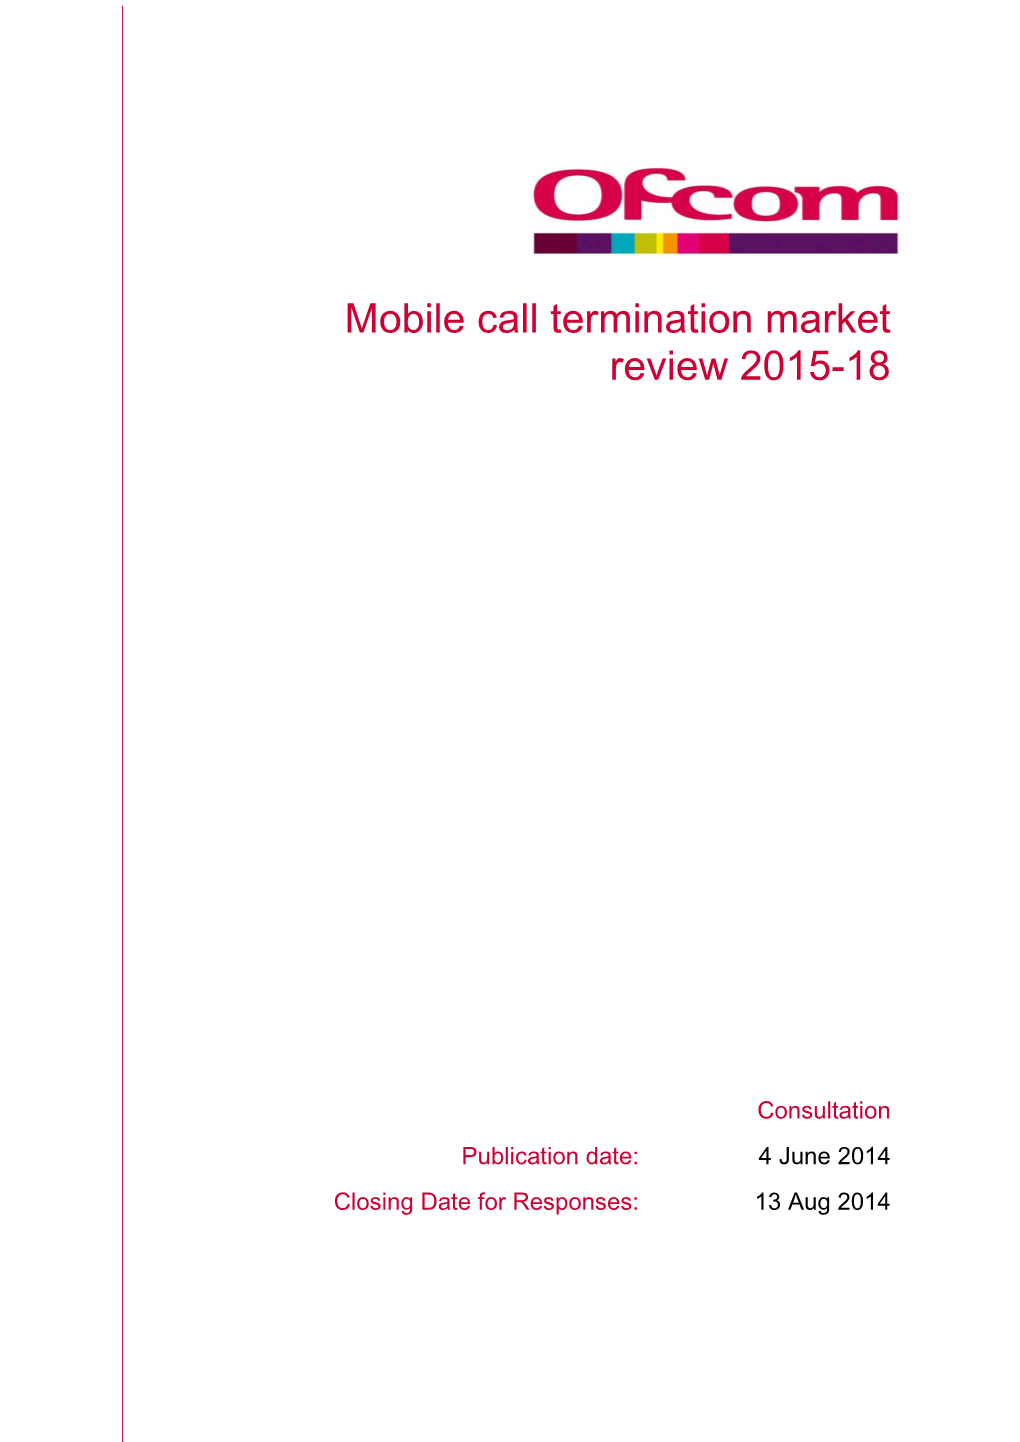 Mobile Call Termination Market Review 2015-18